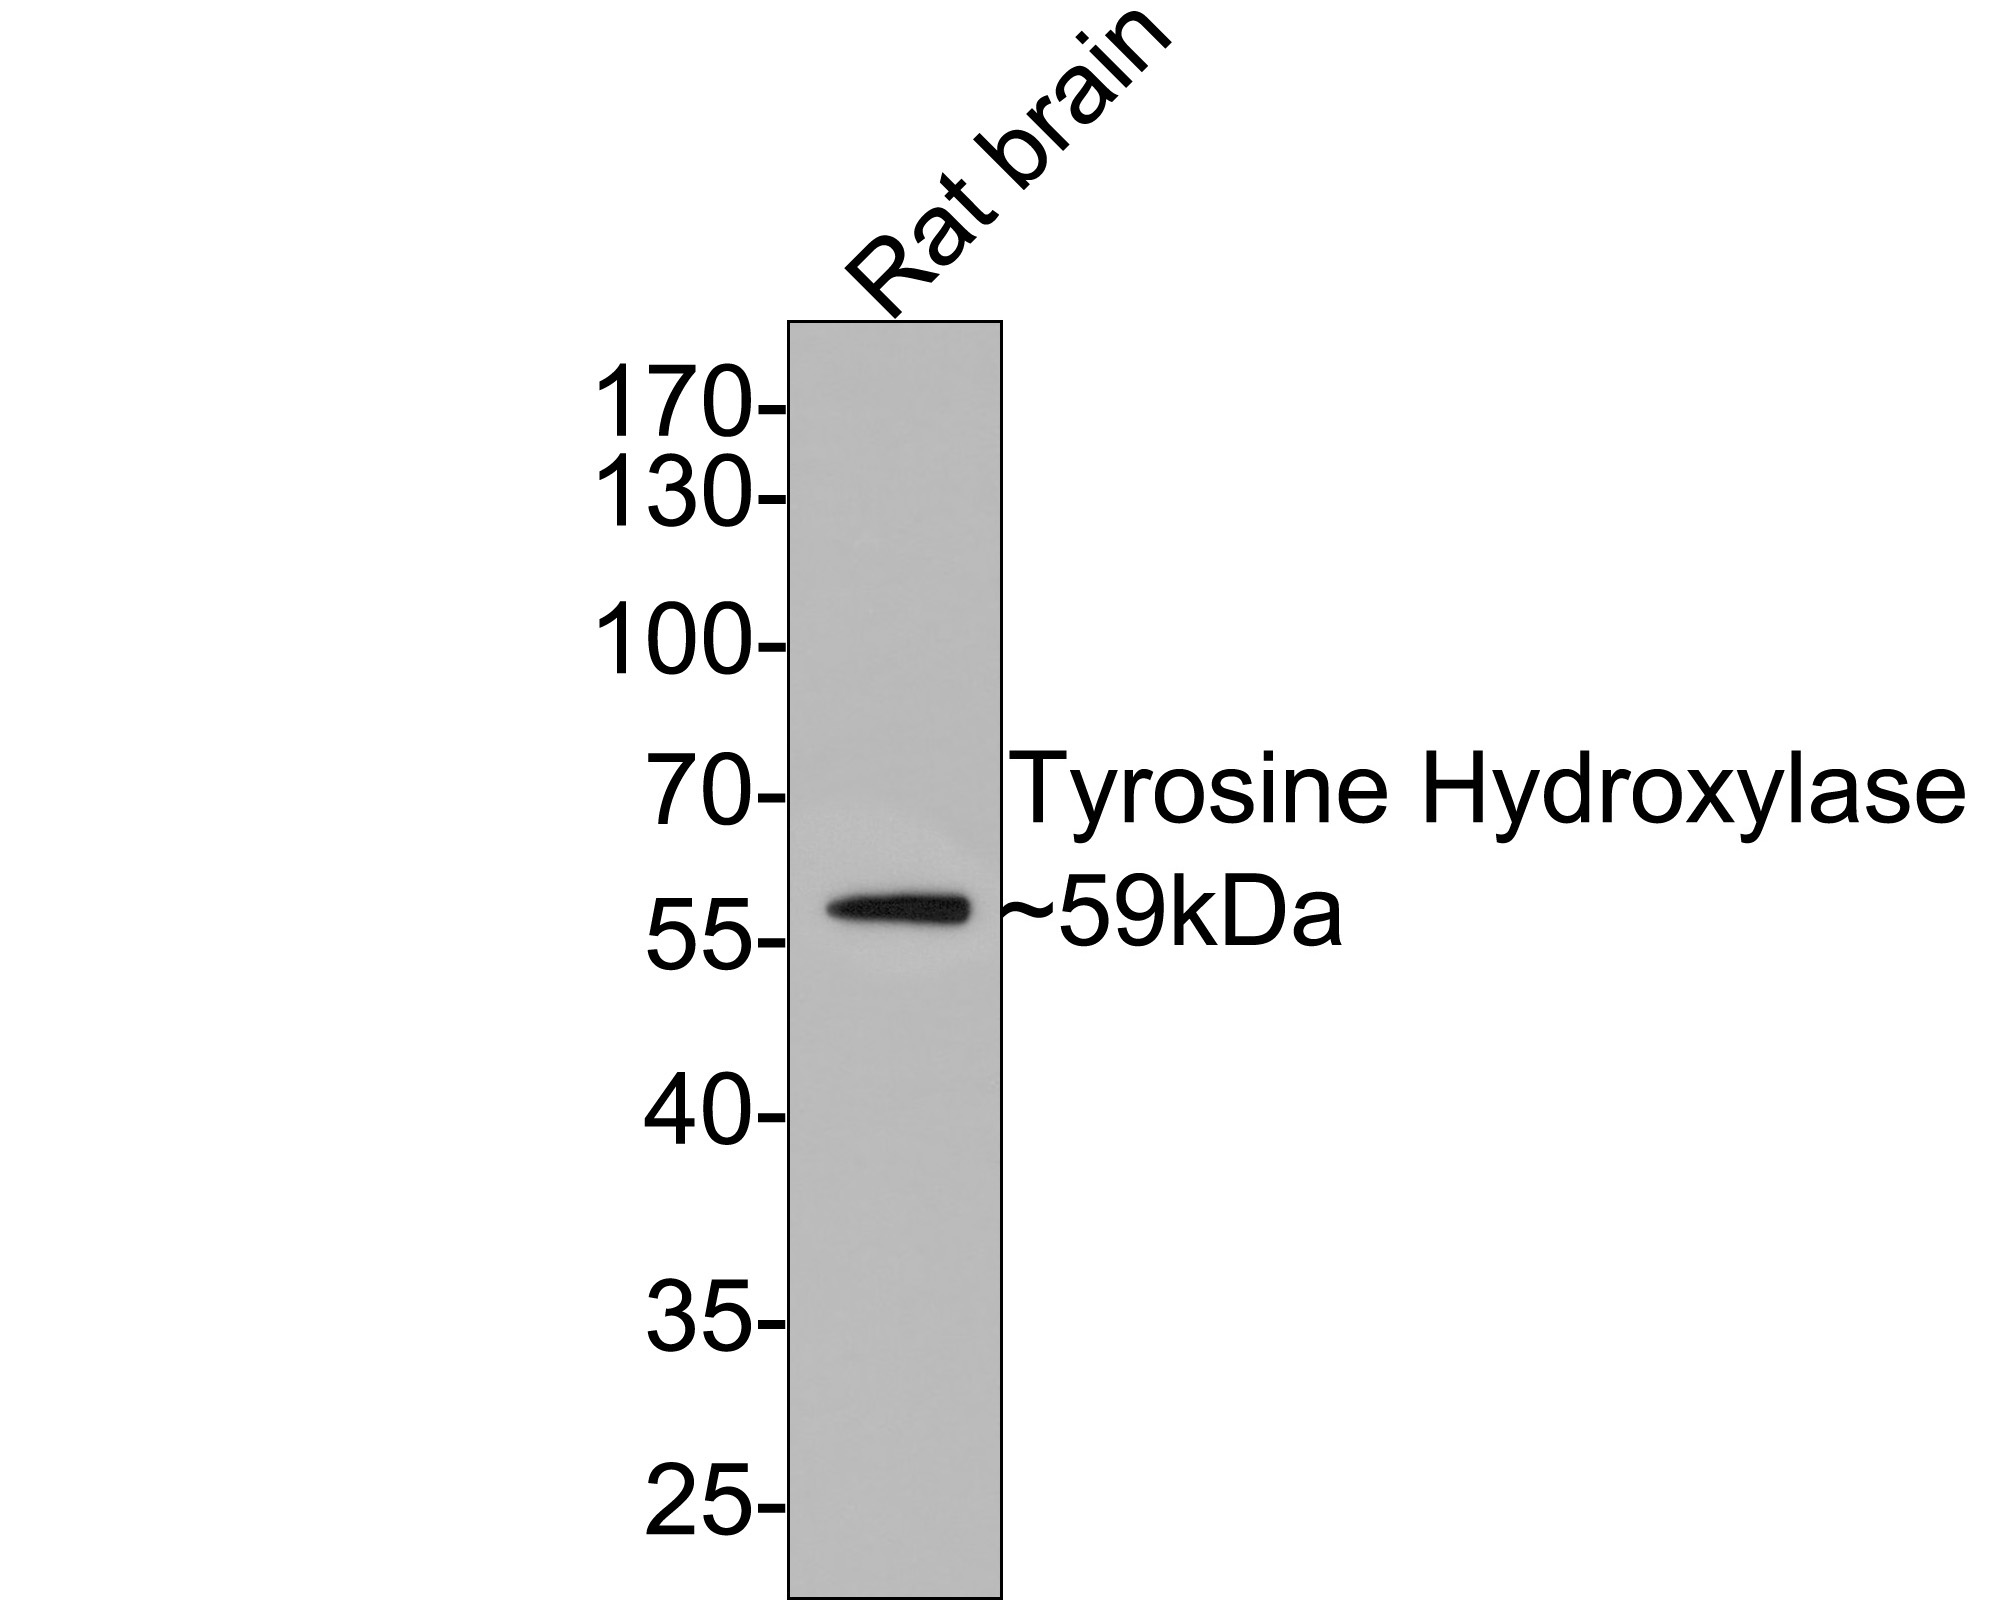 Western blot analysis of Tyrosine Hydroxylase on rat brain tissue lysates with Rabbit anti-Tyrosine Hydroxylase antibody (ET1611-12) at 1/1,000 dilution.<br />
<br />
Lysates/proteins at 20 µg/Lane.<br />
<br />
Predicted band size: 59 kDa<br />
Observed band size: 59 kDa<br />
<br />
Exposure time: 2 minutes;<br />
<br />
10% SDS-PAGE gel.<br />
<br />
Proteins were transferred to a PVDF membrane and blocked with 5% NFDM/TBST for 1 hour at room temperature. The primary antibody (ET1611-12) at 1/1,000 dilution was used in 5% NFDM/TBST at room temperature for 2 hours. Goat Anti-Rabbit IgG - HRP Secondary Antibody (HA1001) at 1:300,000 dilution was used for 1 hour at room temperature.